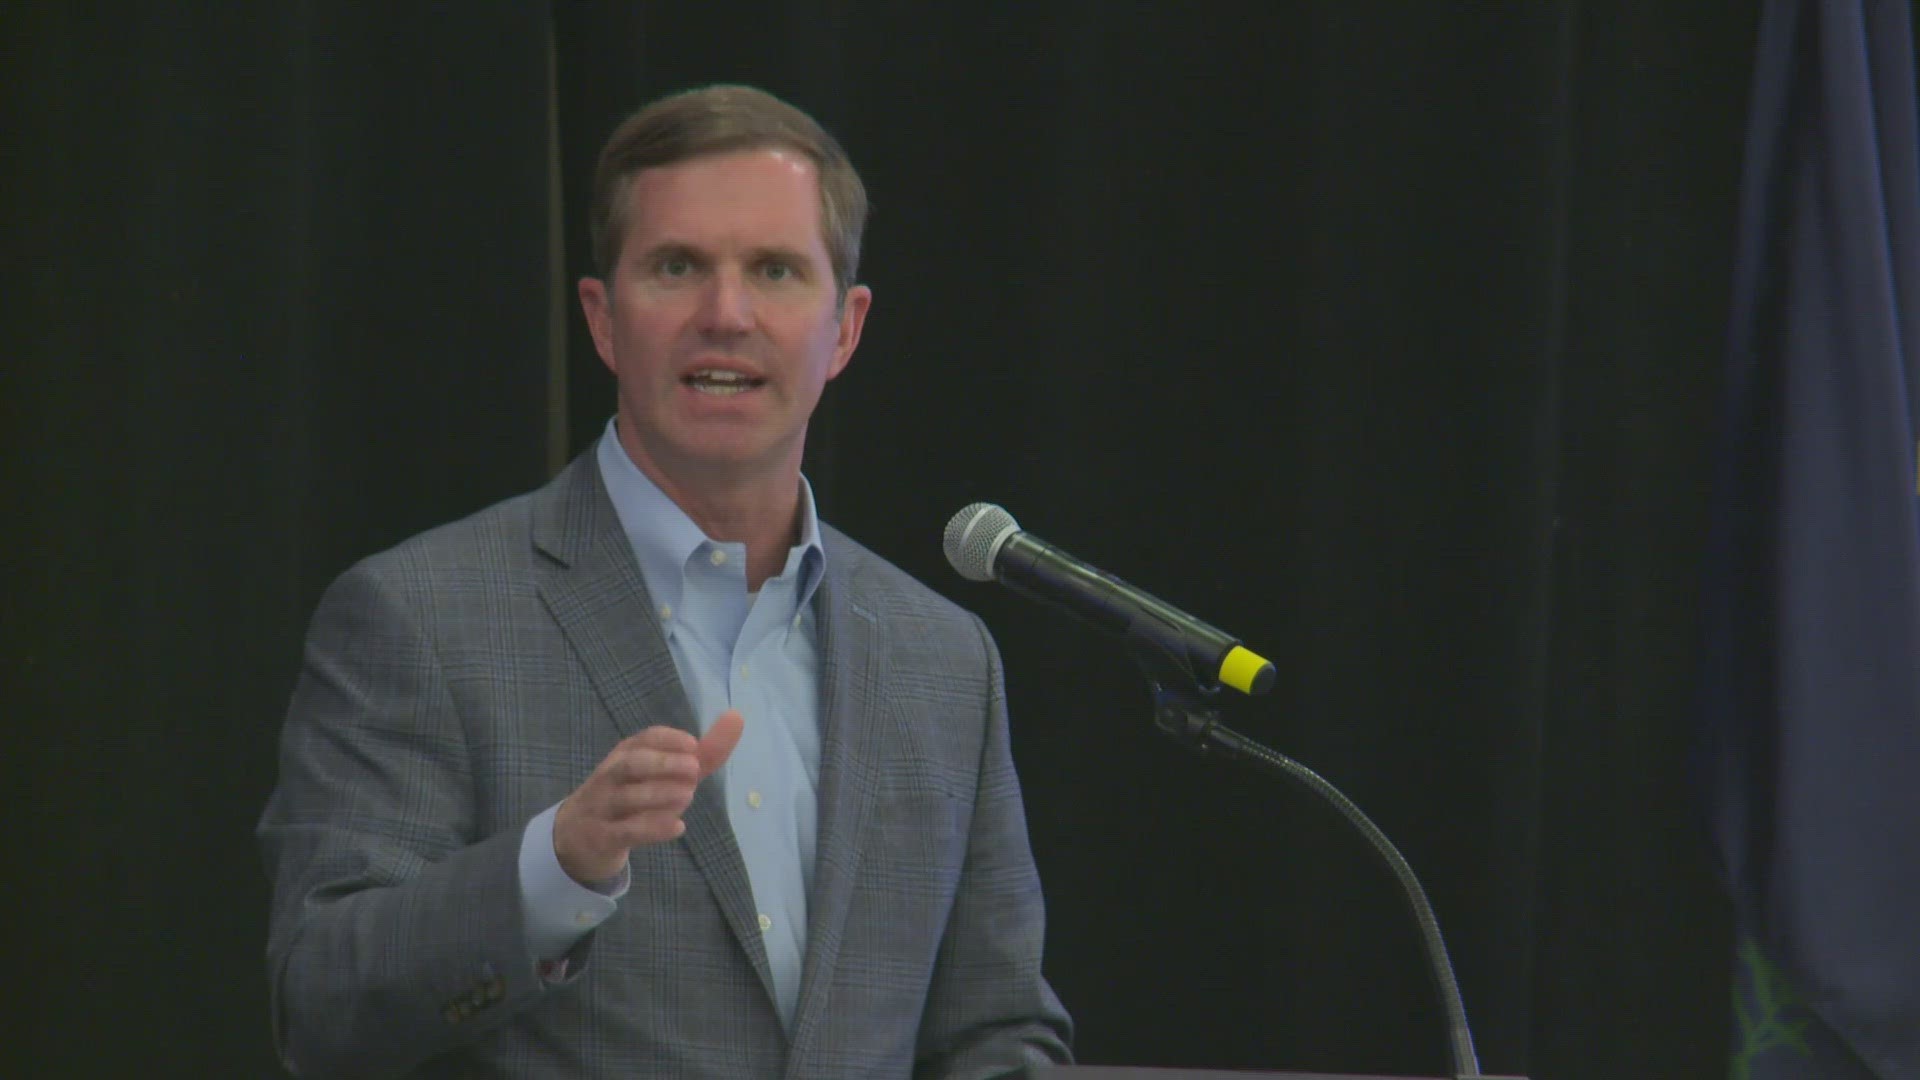 Governor Andy Beshear was in Louisville shared his top priorities for his second term at Greater Louisville Inc.'s Capitol Connection event.